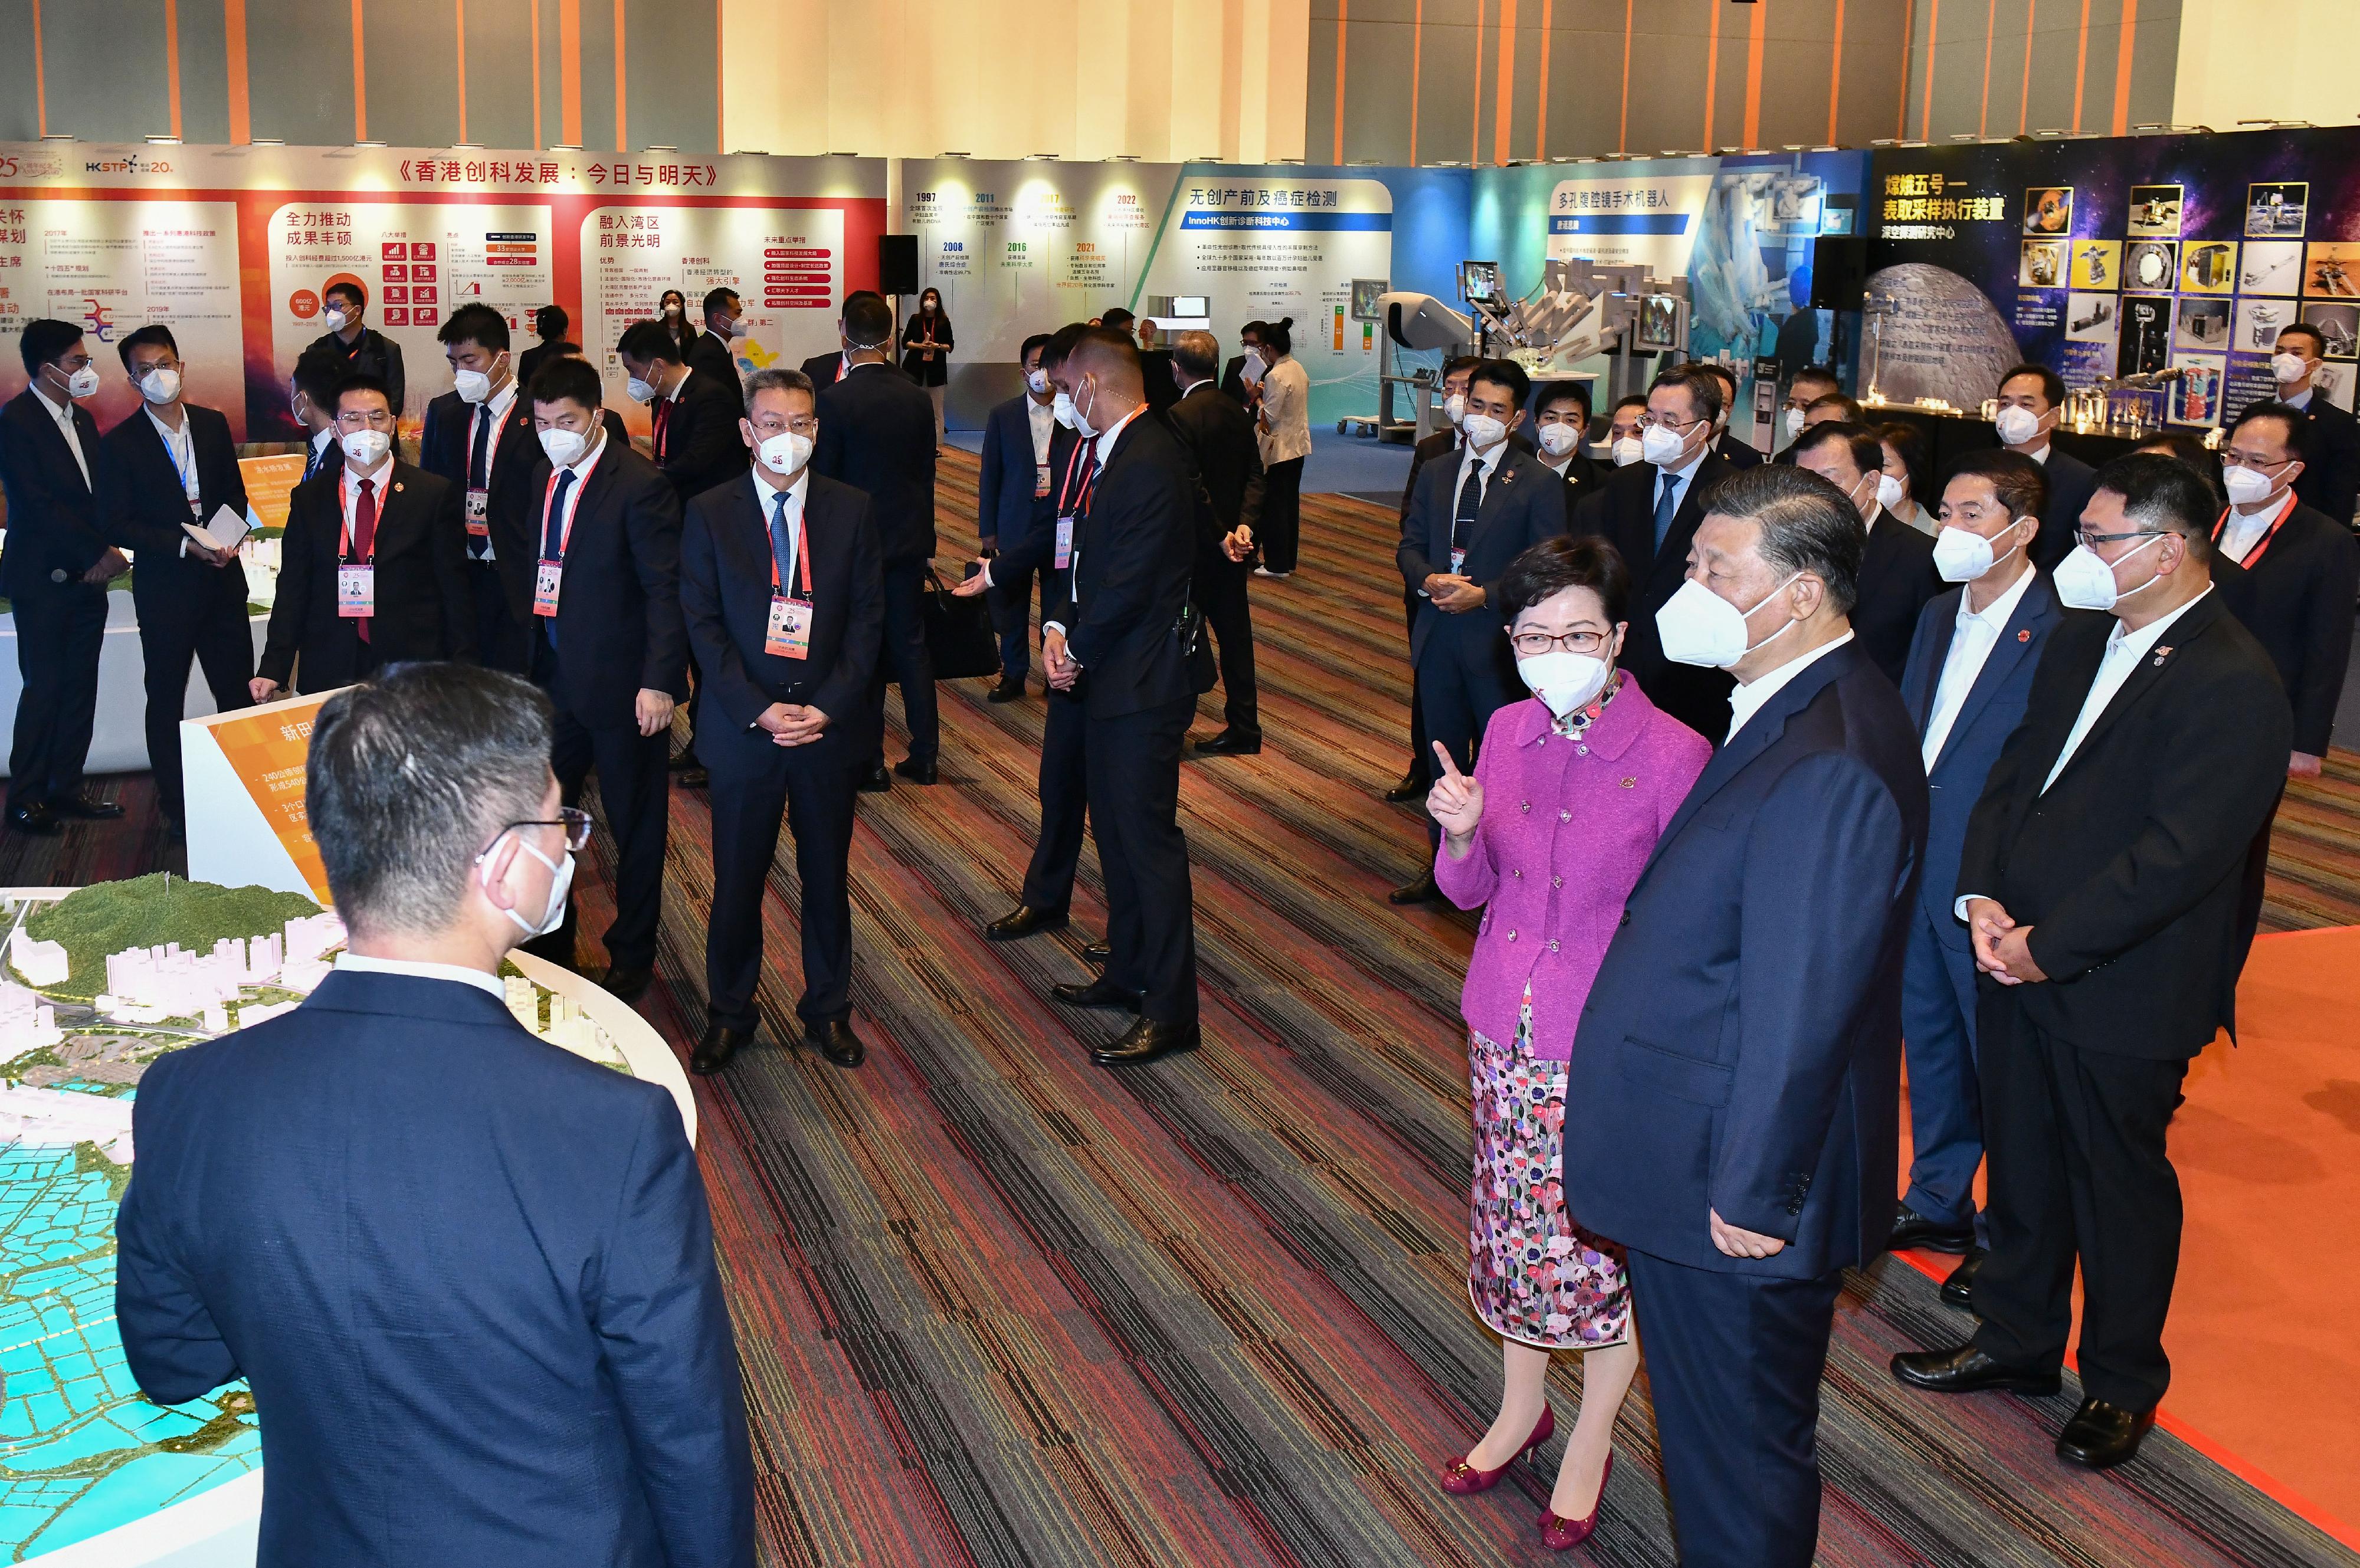 President Xi Jinping (front, first right), accompanied by the Chief Executive, Mrs Carrie Lam (front, second right), visited the Hong Kong Science Park to inspect the development of innovation and technology in Hong Kong today (June 30). 